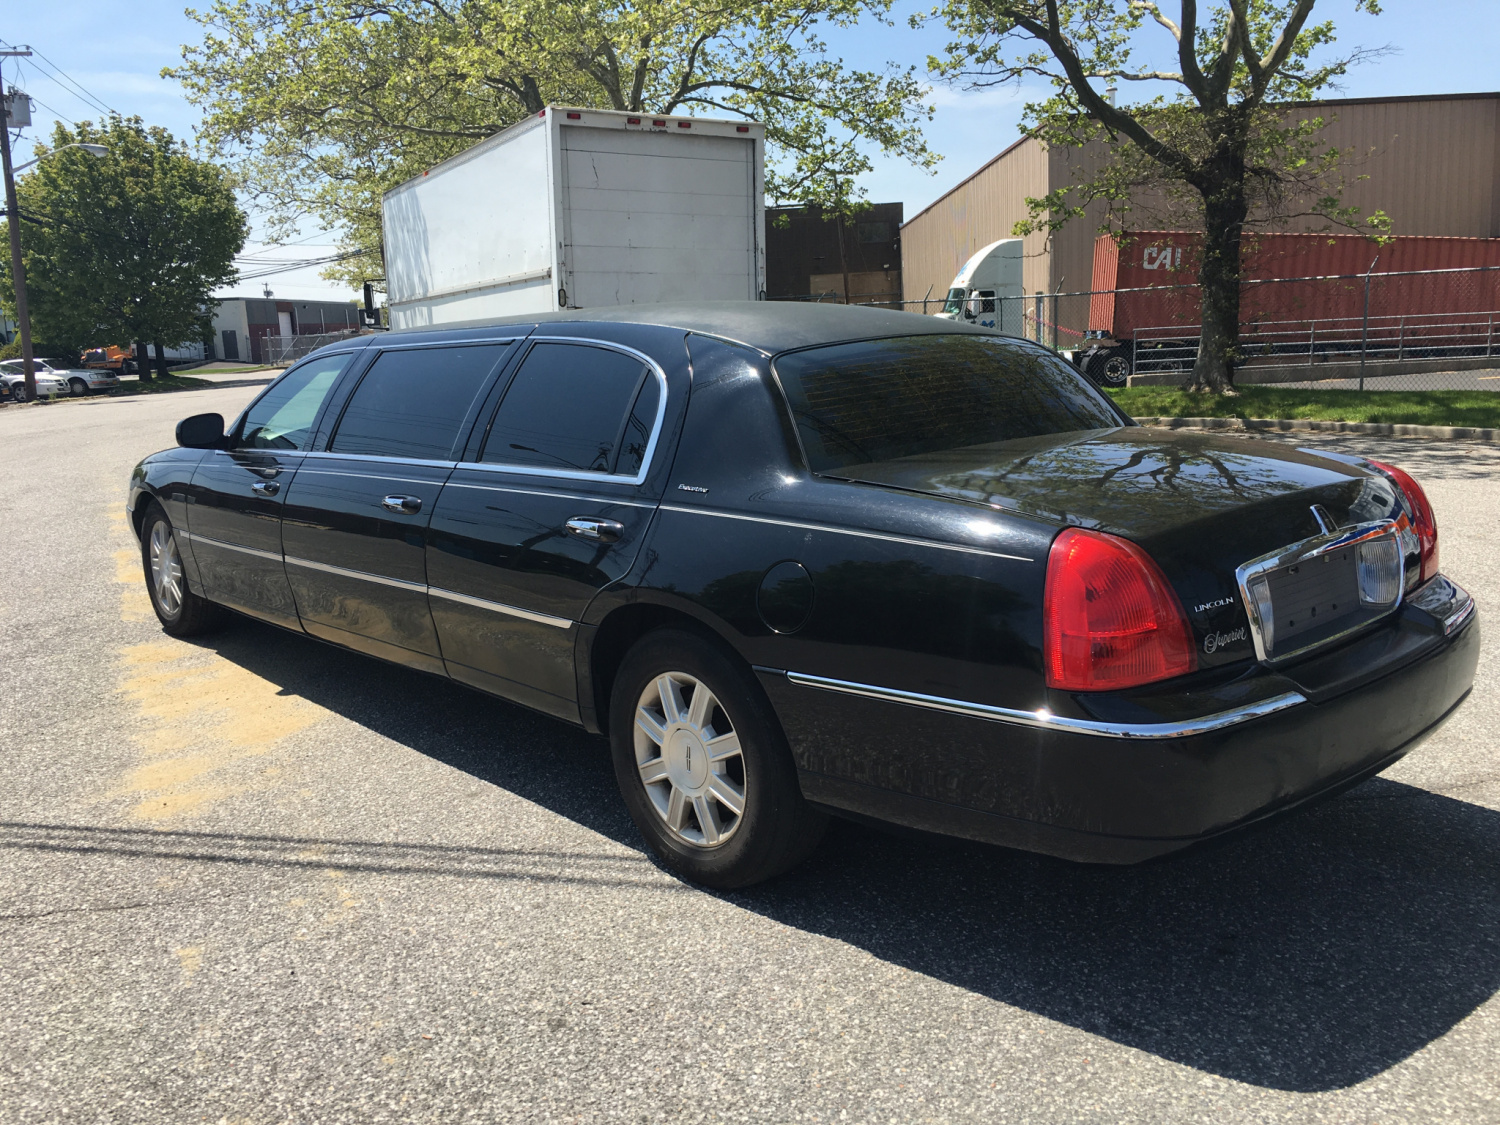 Where can you find a used funeral limousine?